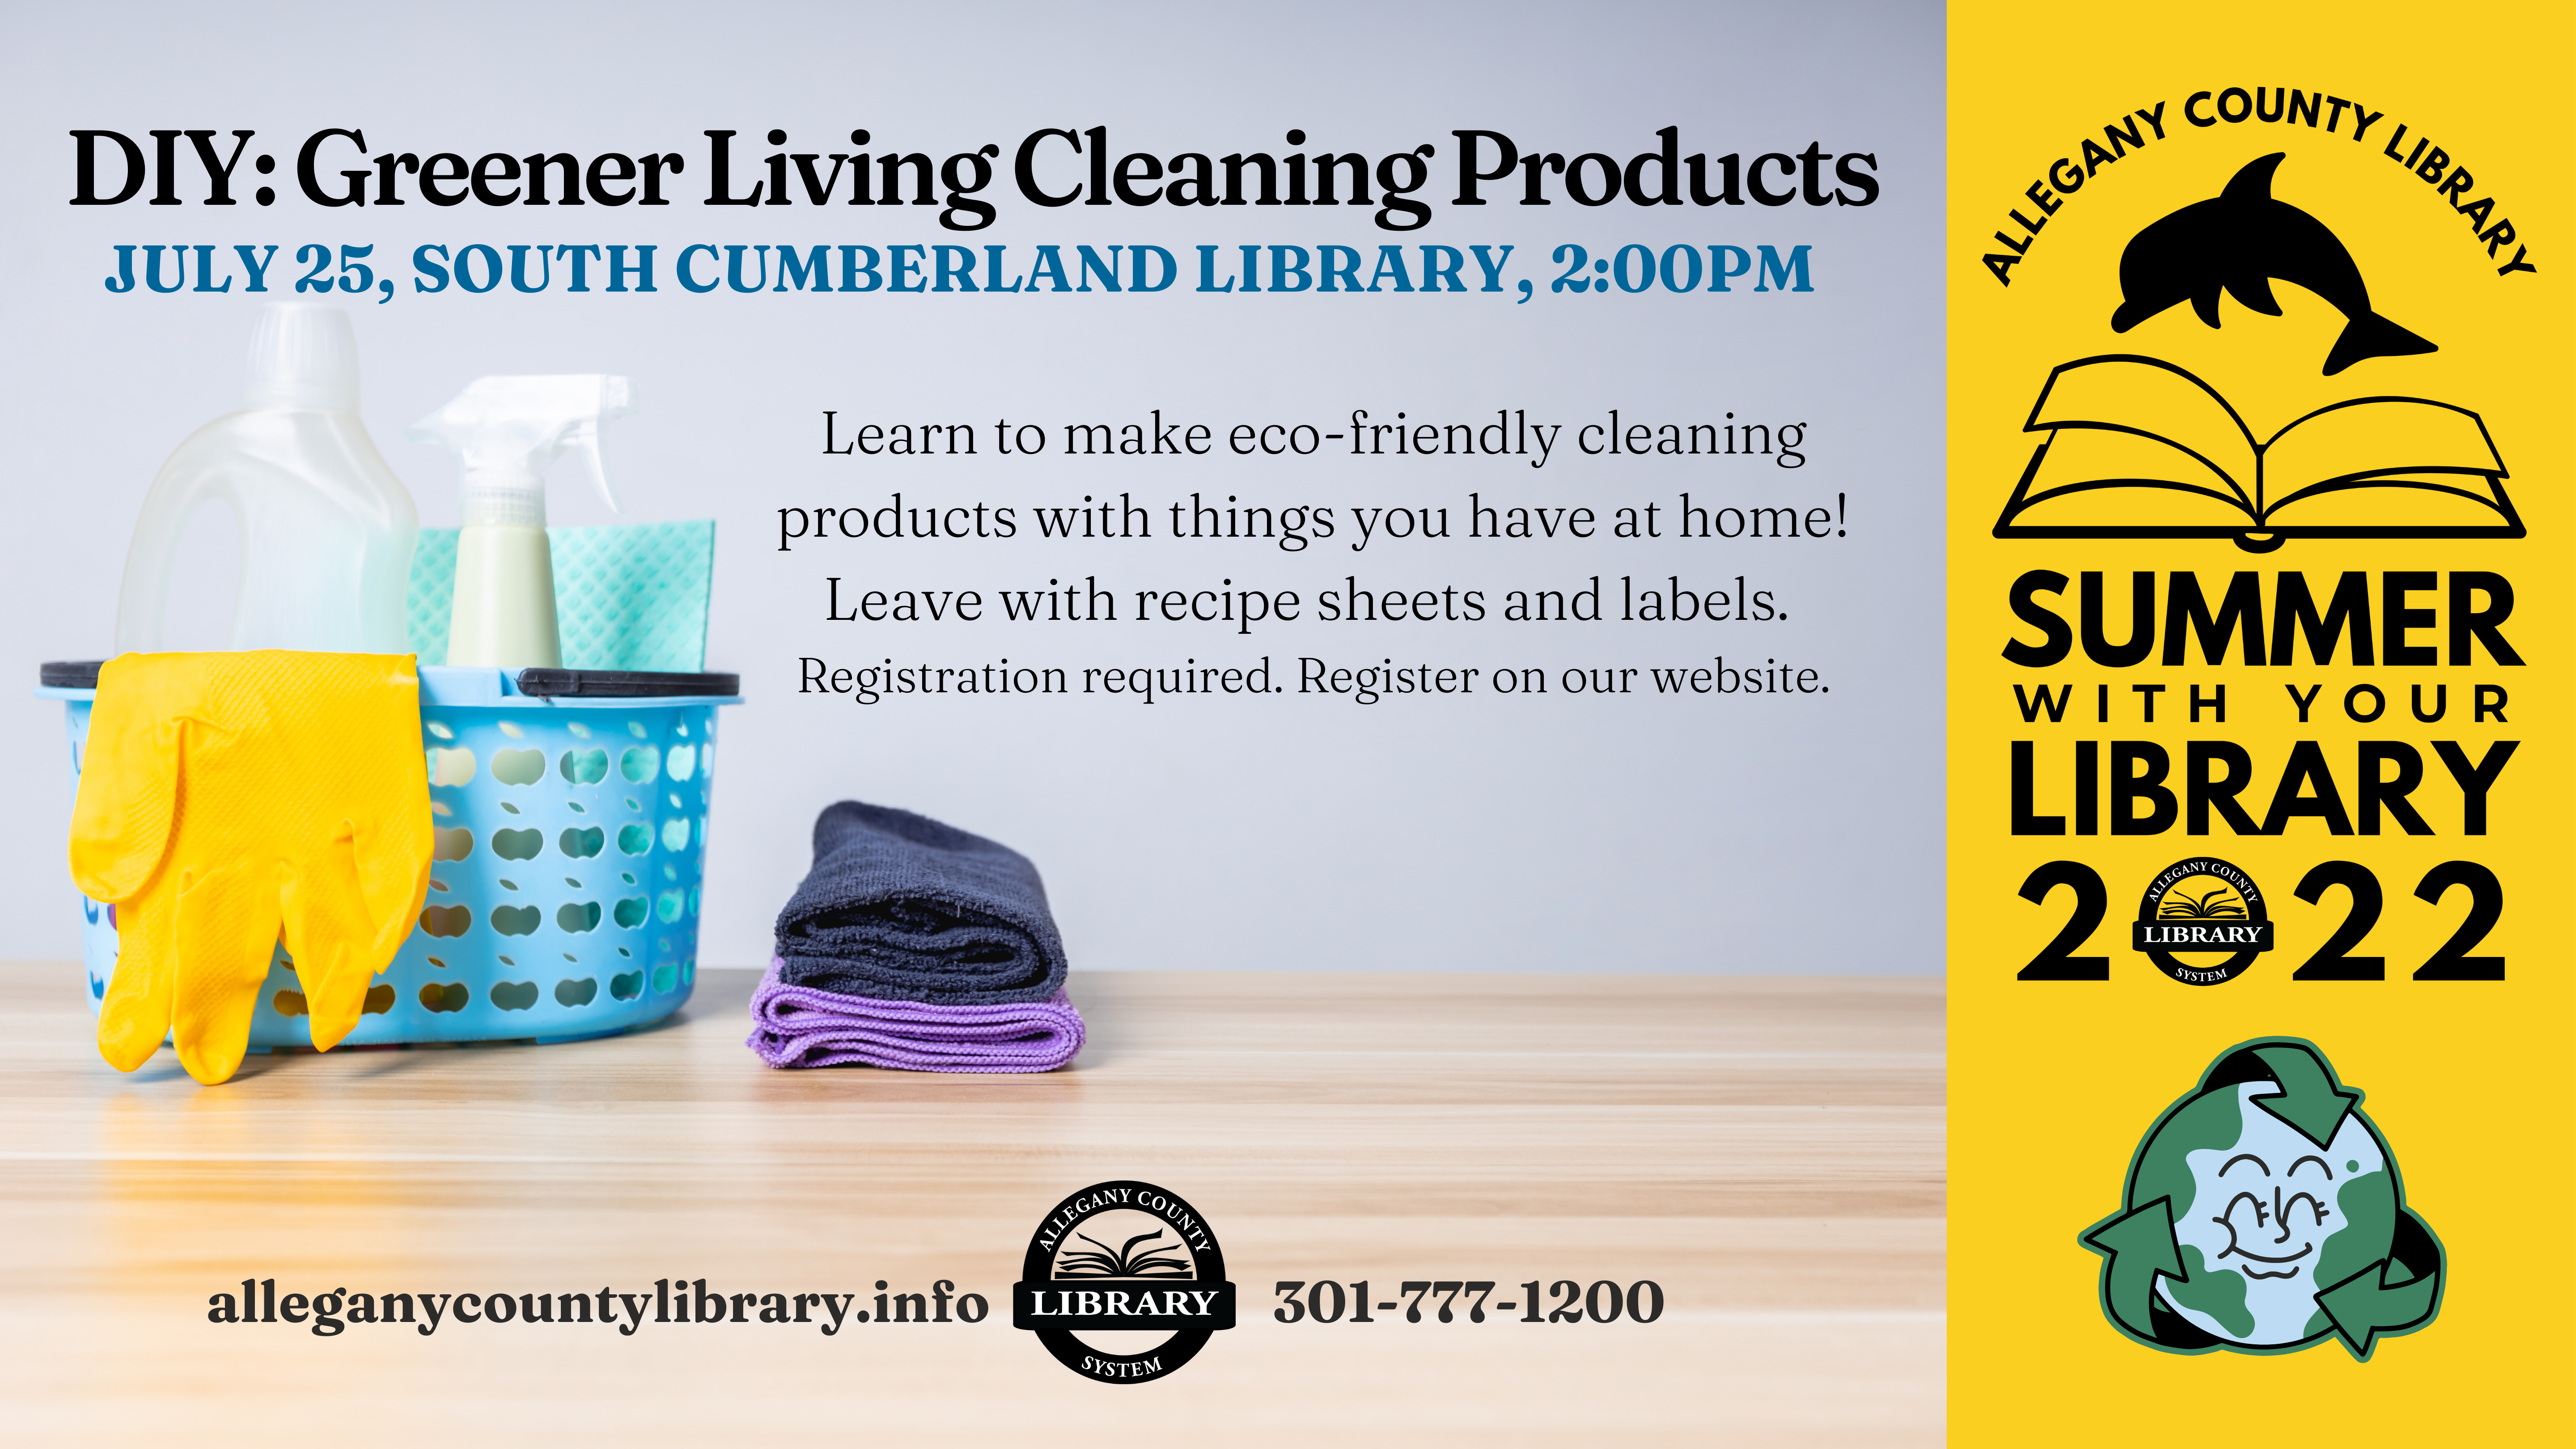 Cleaner living cleaning DIY event details